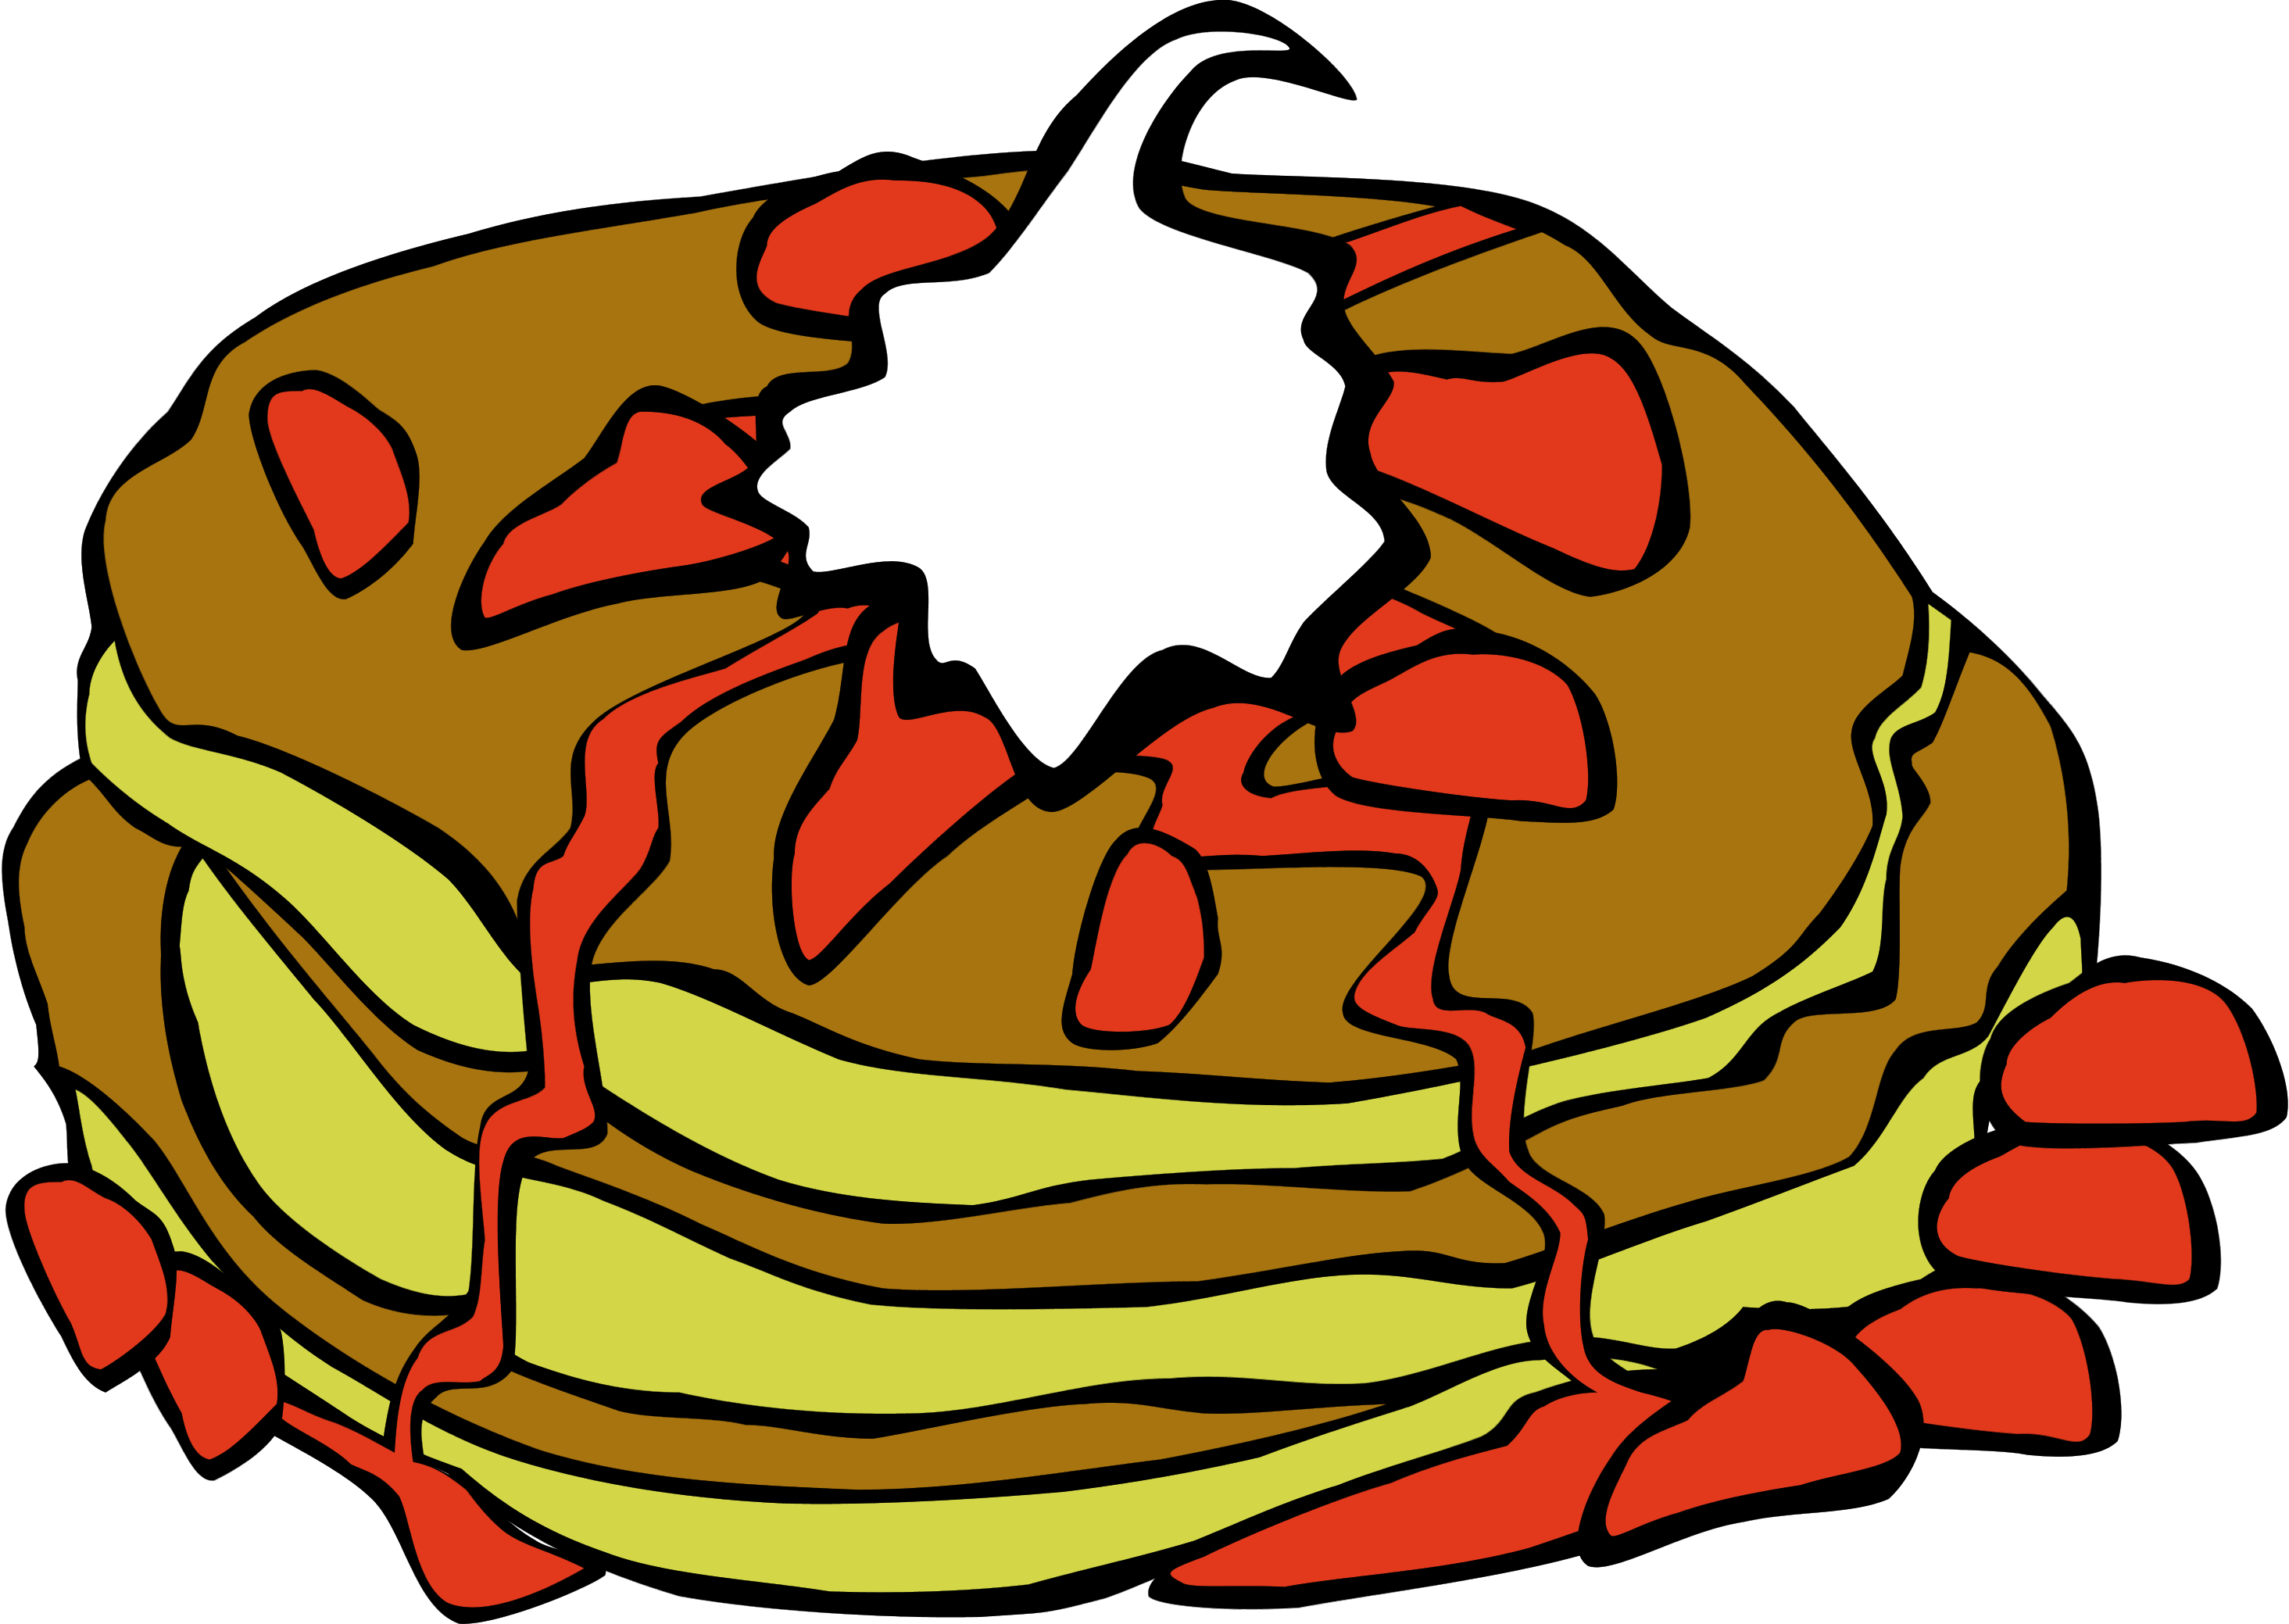 Pancake clipart baking. Carbohydrates group carbohydrate food